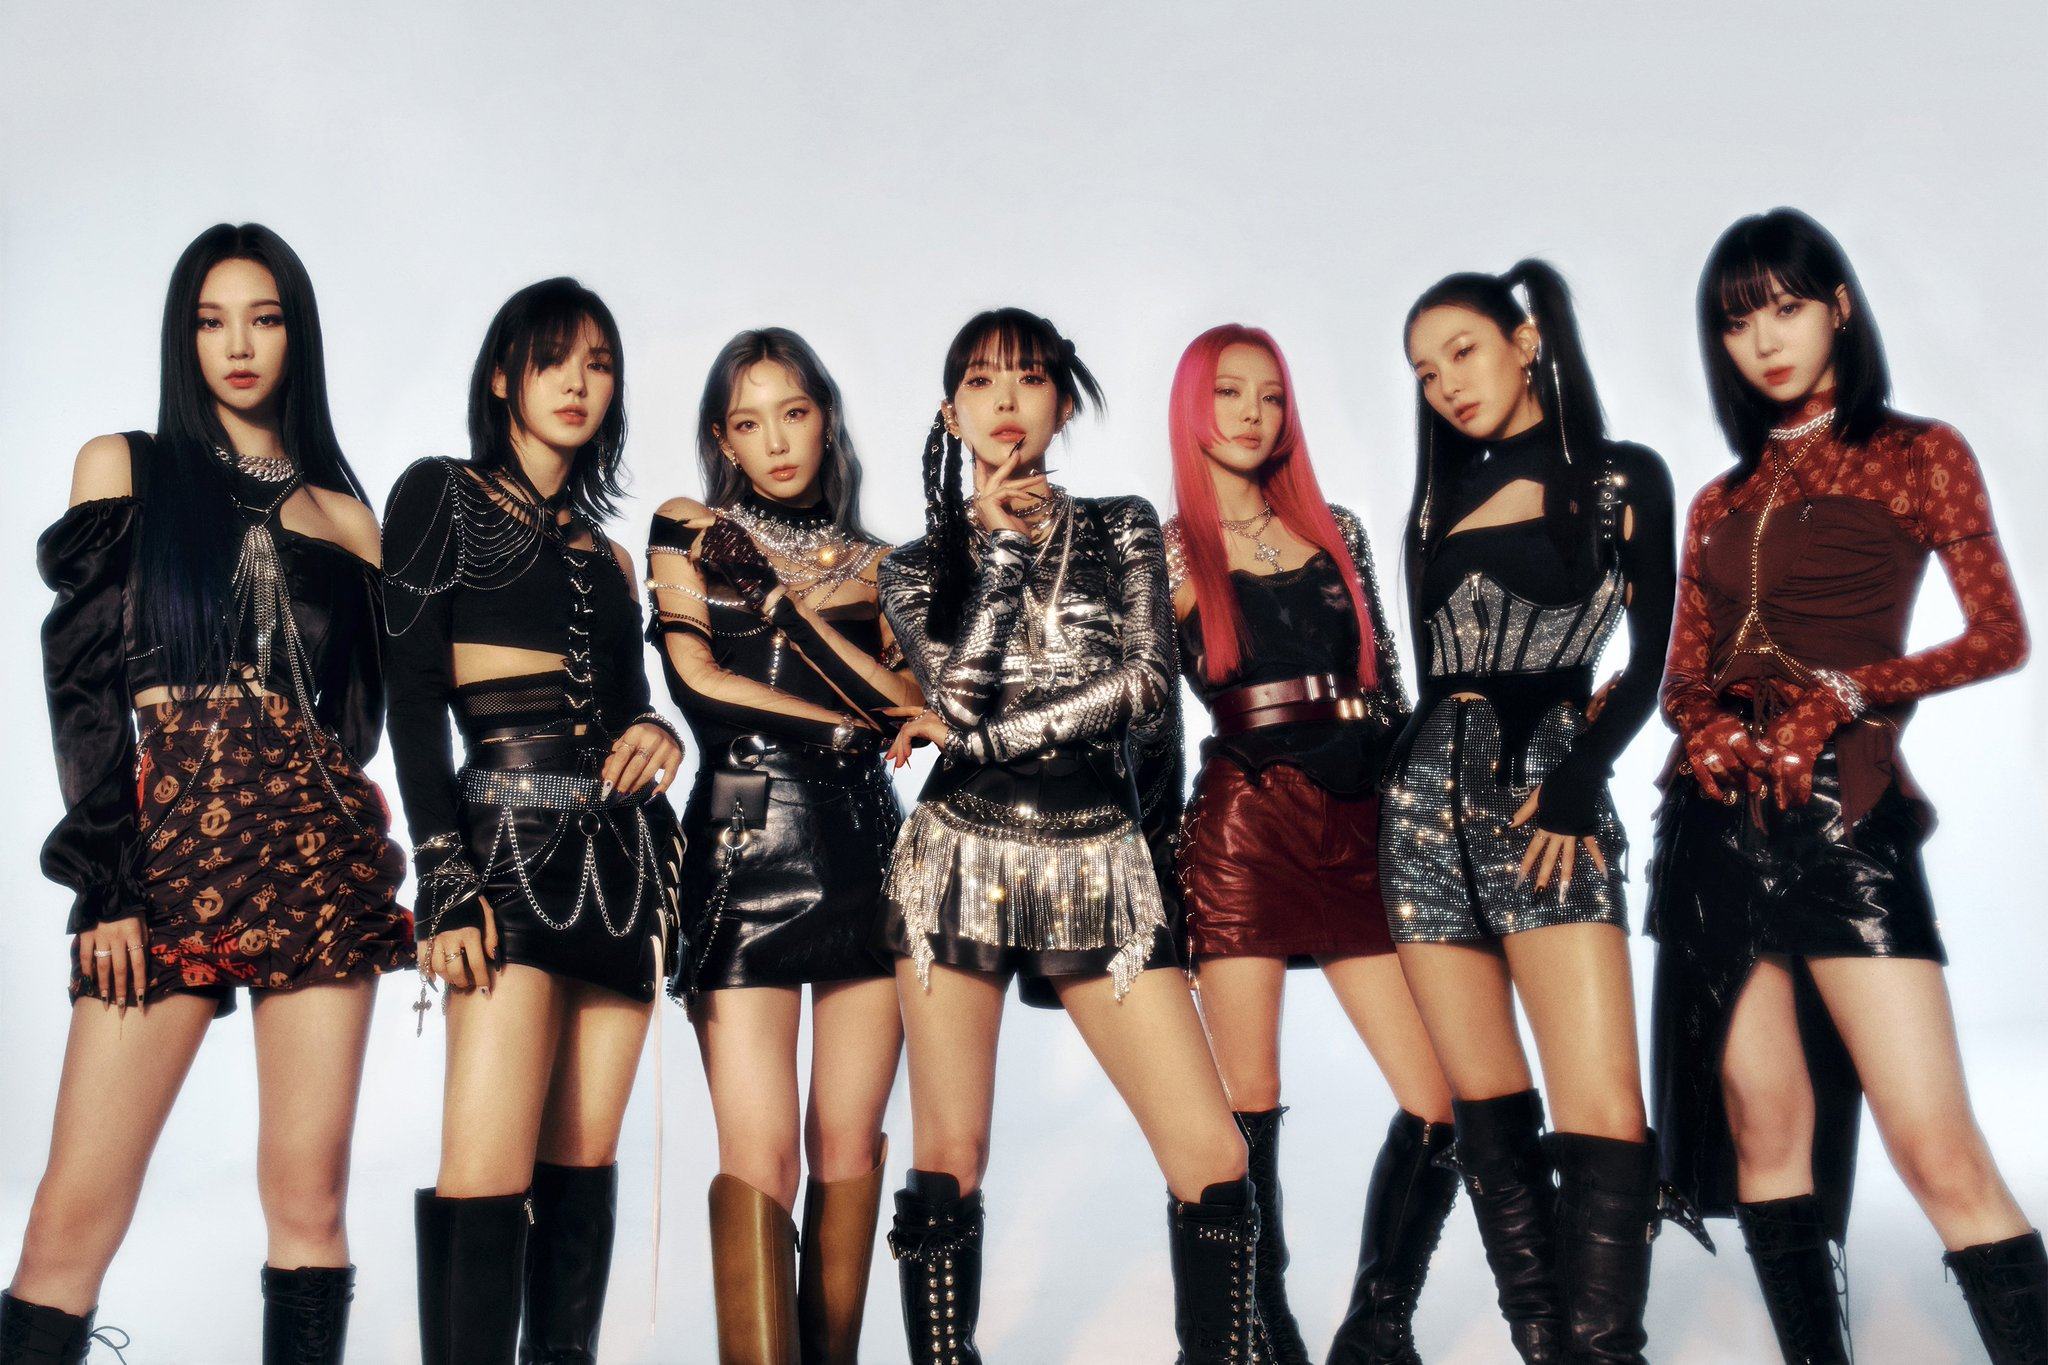 Girls on Top, a newly formed K-pop female supergroup, includes some of the biggest names in Korean pop and will make their debut in a New Year concert on January 1. Photo: SM Entertainment